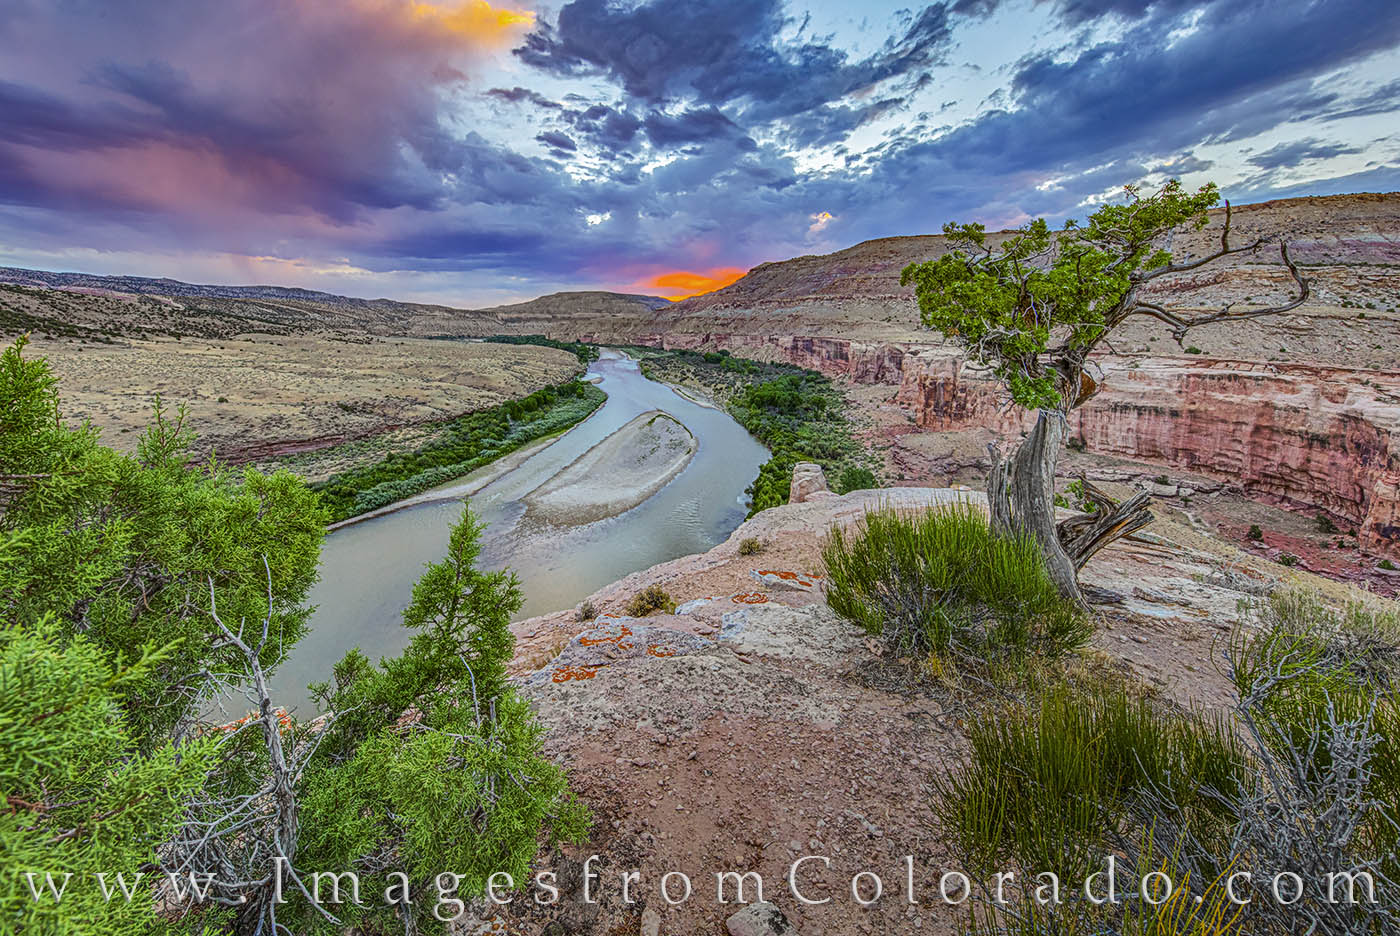 Hiking along the bike trails of the Kokopelli Trail, some locals and I came across this amazing view of the Colorado River and...